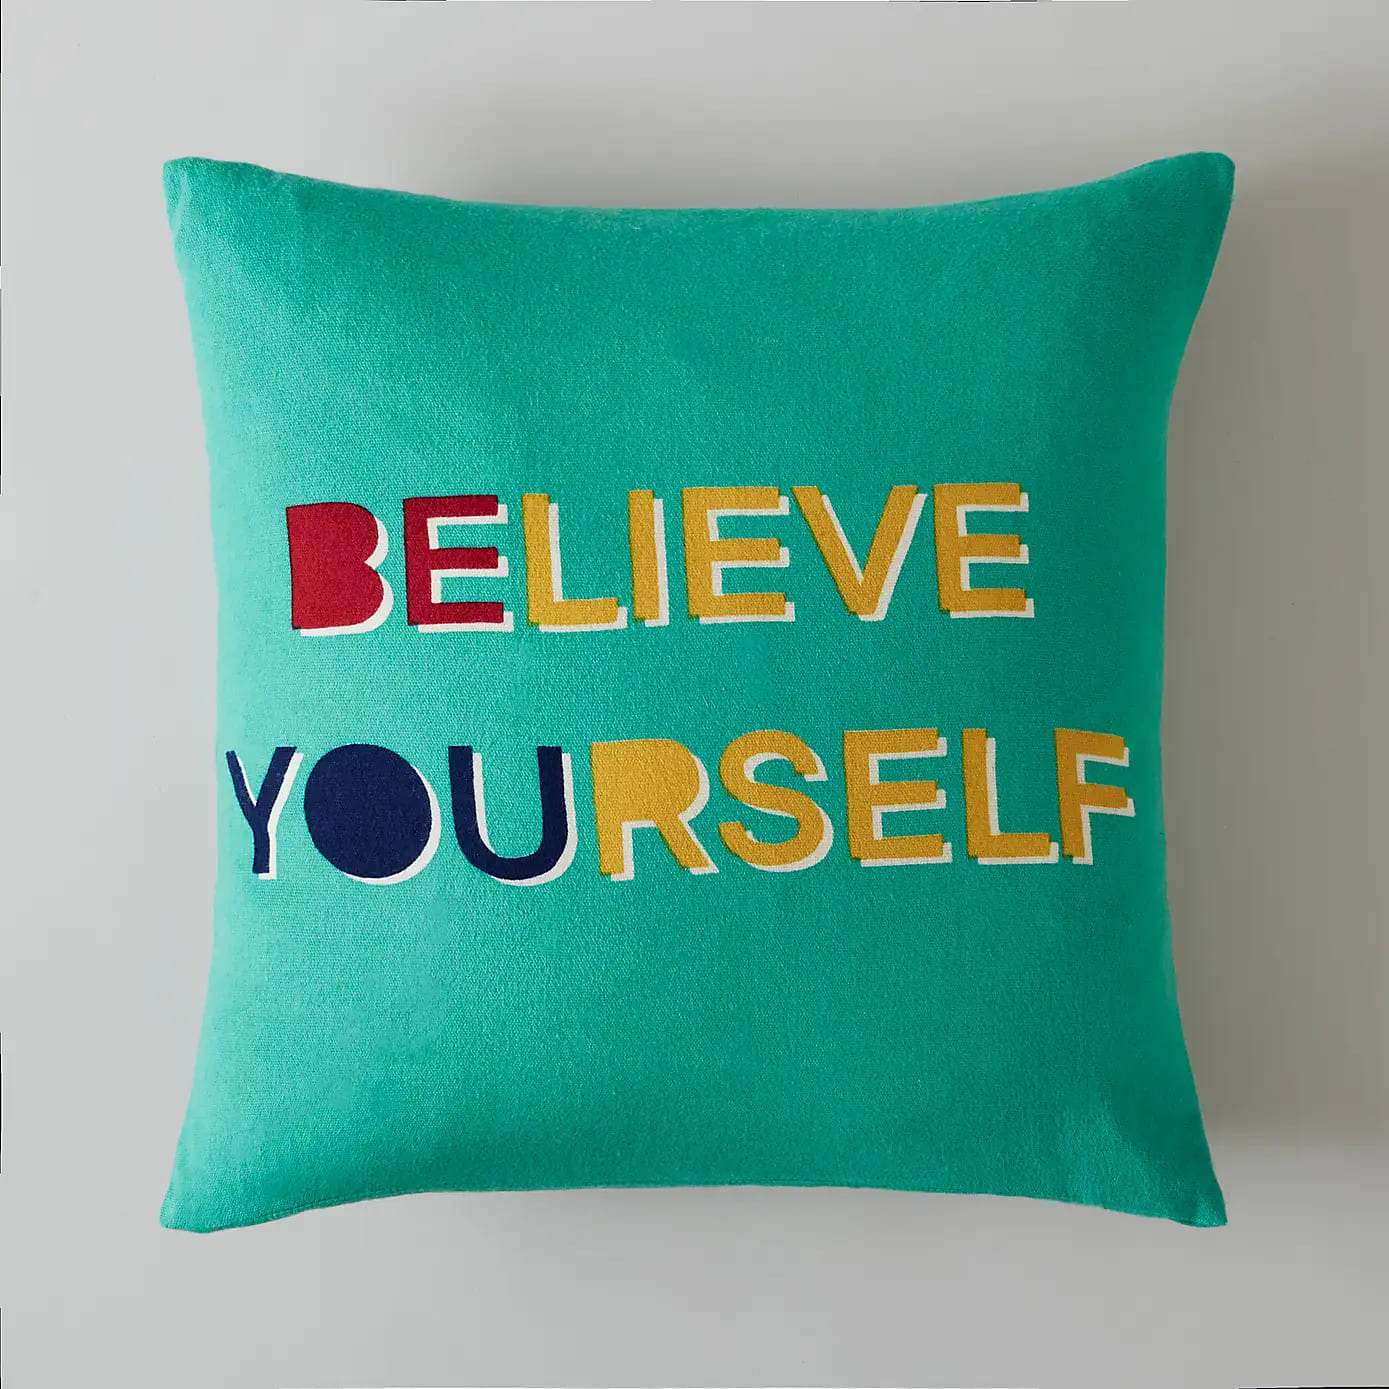 100% Recycled Printed Cushion